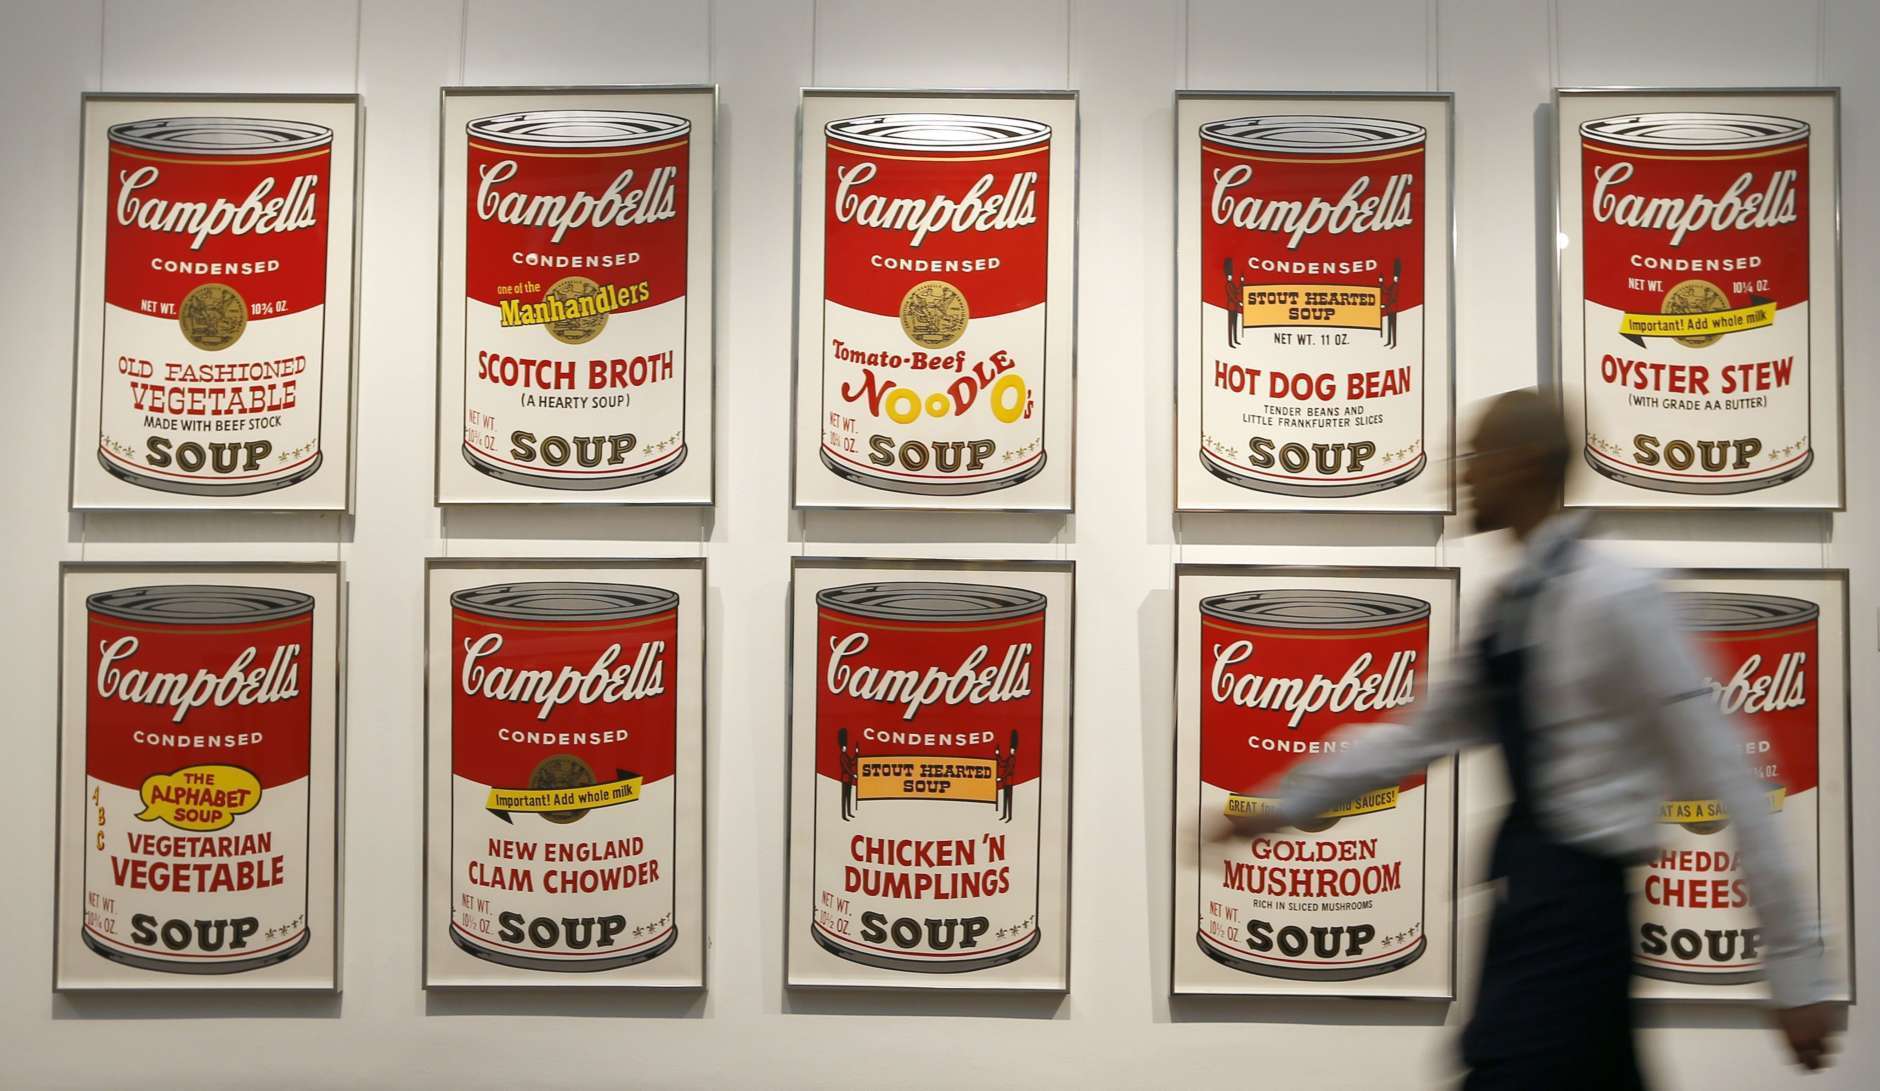 A Sotheby's technician walks past a set of Andy Warhol's Campbell's Soup screenprints at the auction rooms in London, Friday, March 15, 2013. The set of ten screenprints is estimated at 100,000-150,000 pounds ($152,000-228,000) (euro 116,000-174,000) and will go for auction on March 19, in London. (AP Photo/Kirsty Wigglesworth)